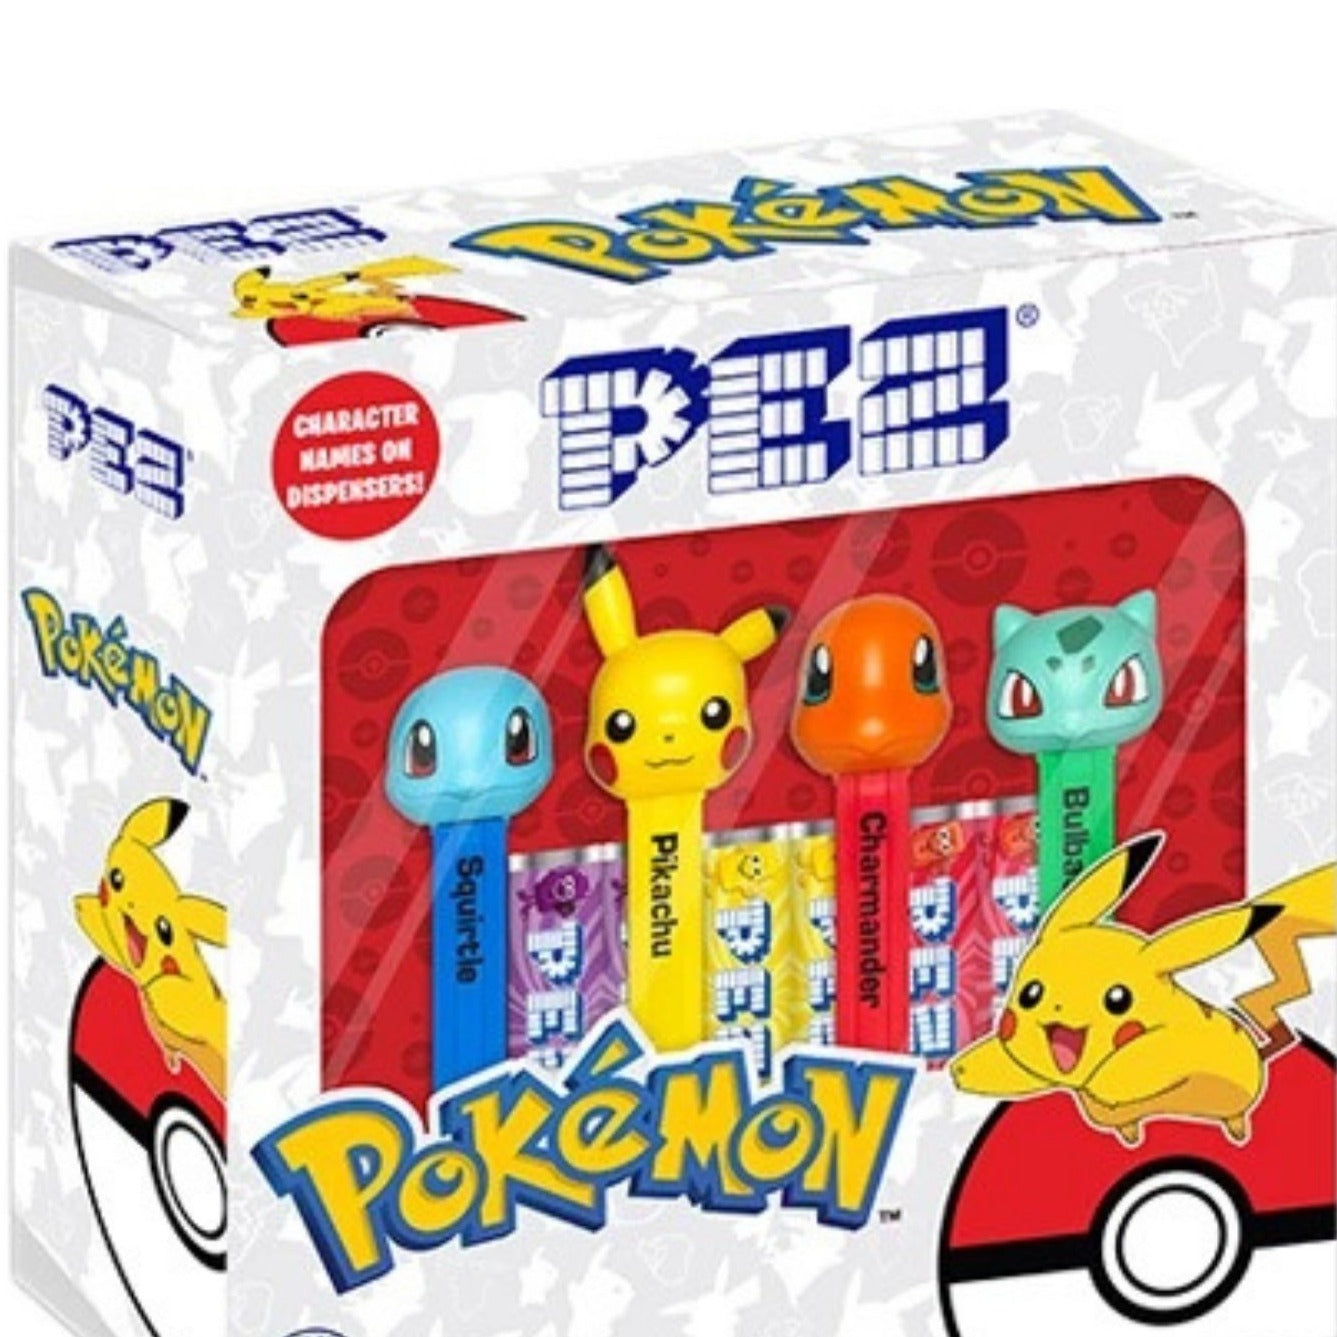 Pez Pokemon Gift set collectors box featuring squirtle, pikachua, charmander and bulbasaur 49.3 grams